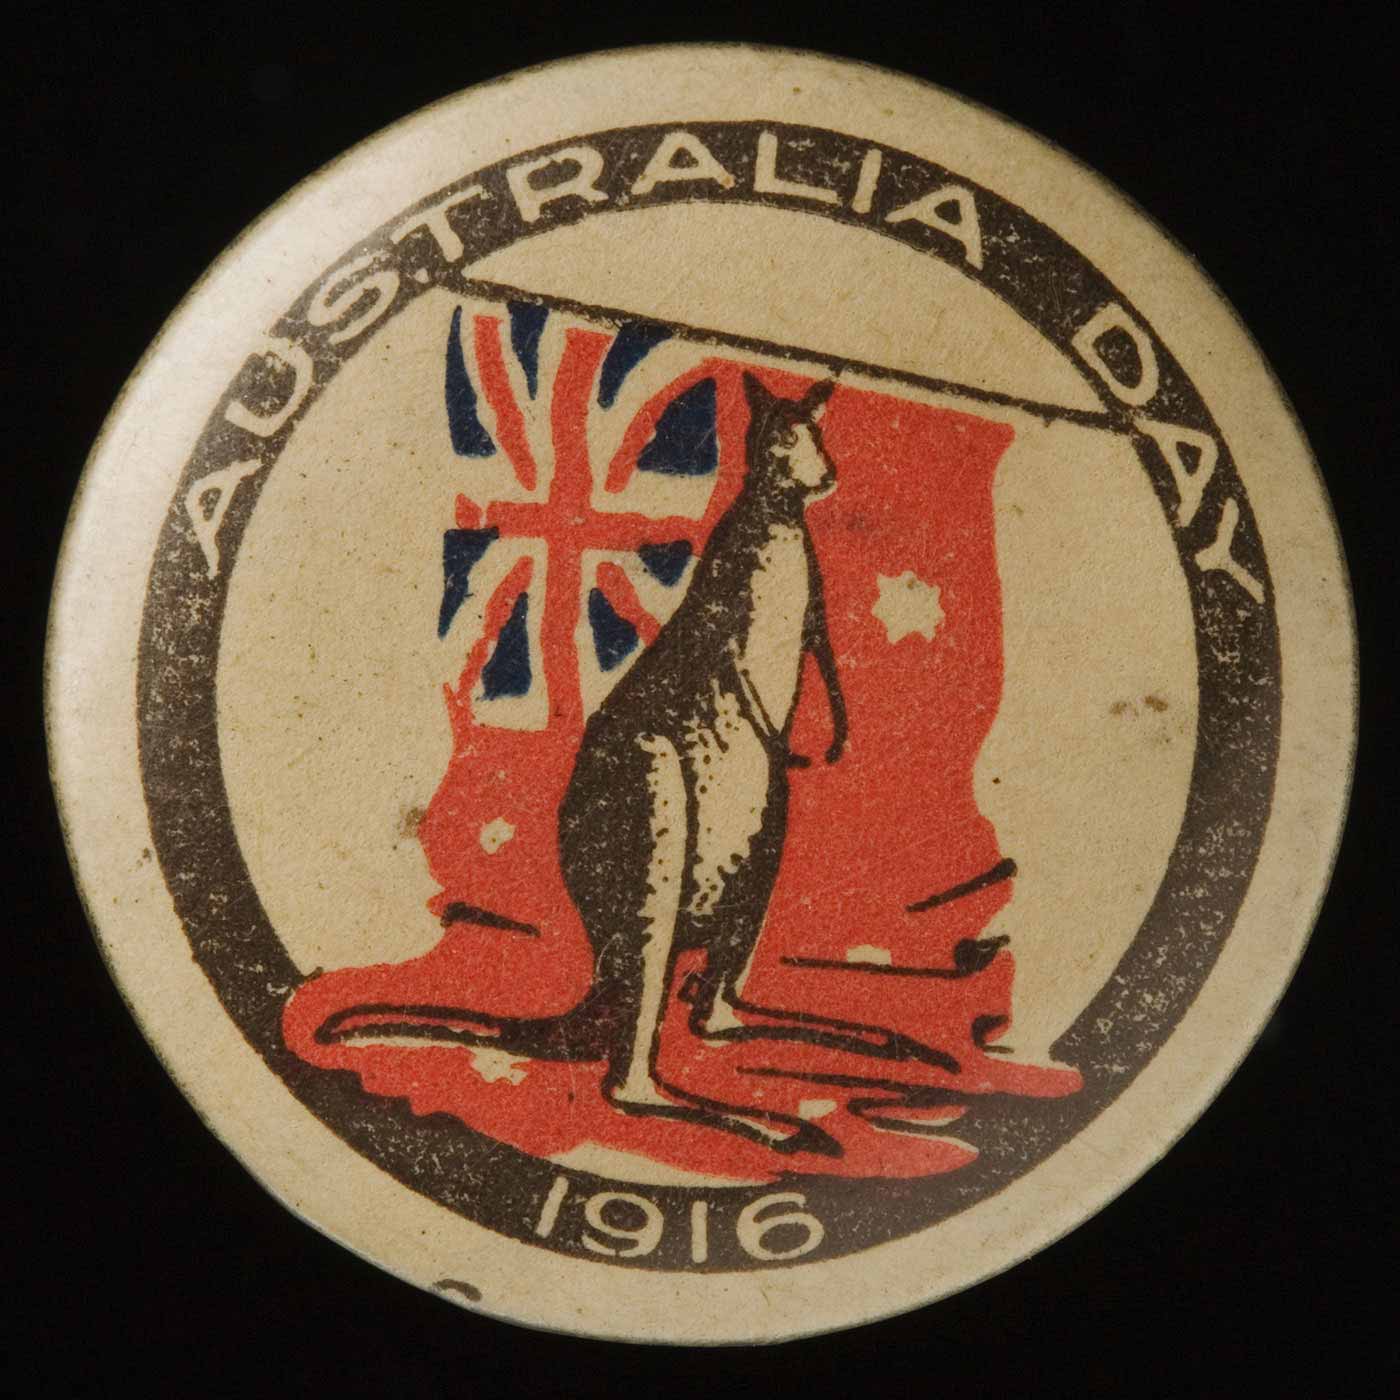 Circular badge with 'Australia Day 1916' printed in a black circular band. The central image shows a kangaroo standing on a red ensign. - click to view larger image